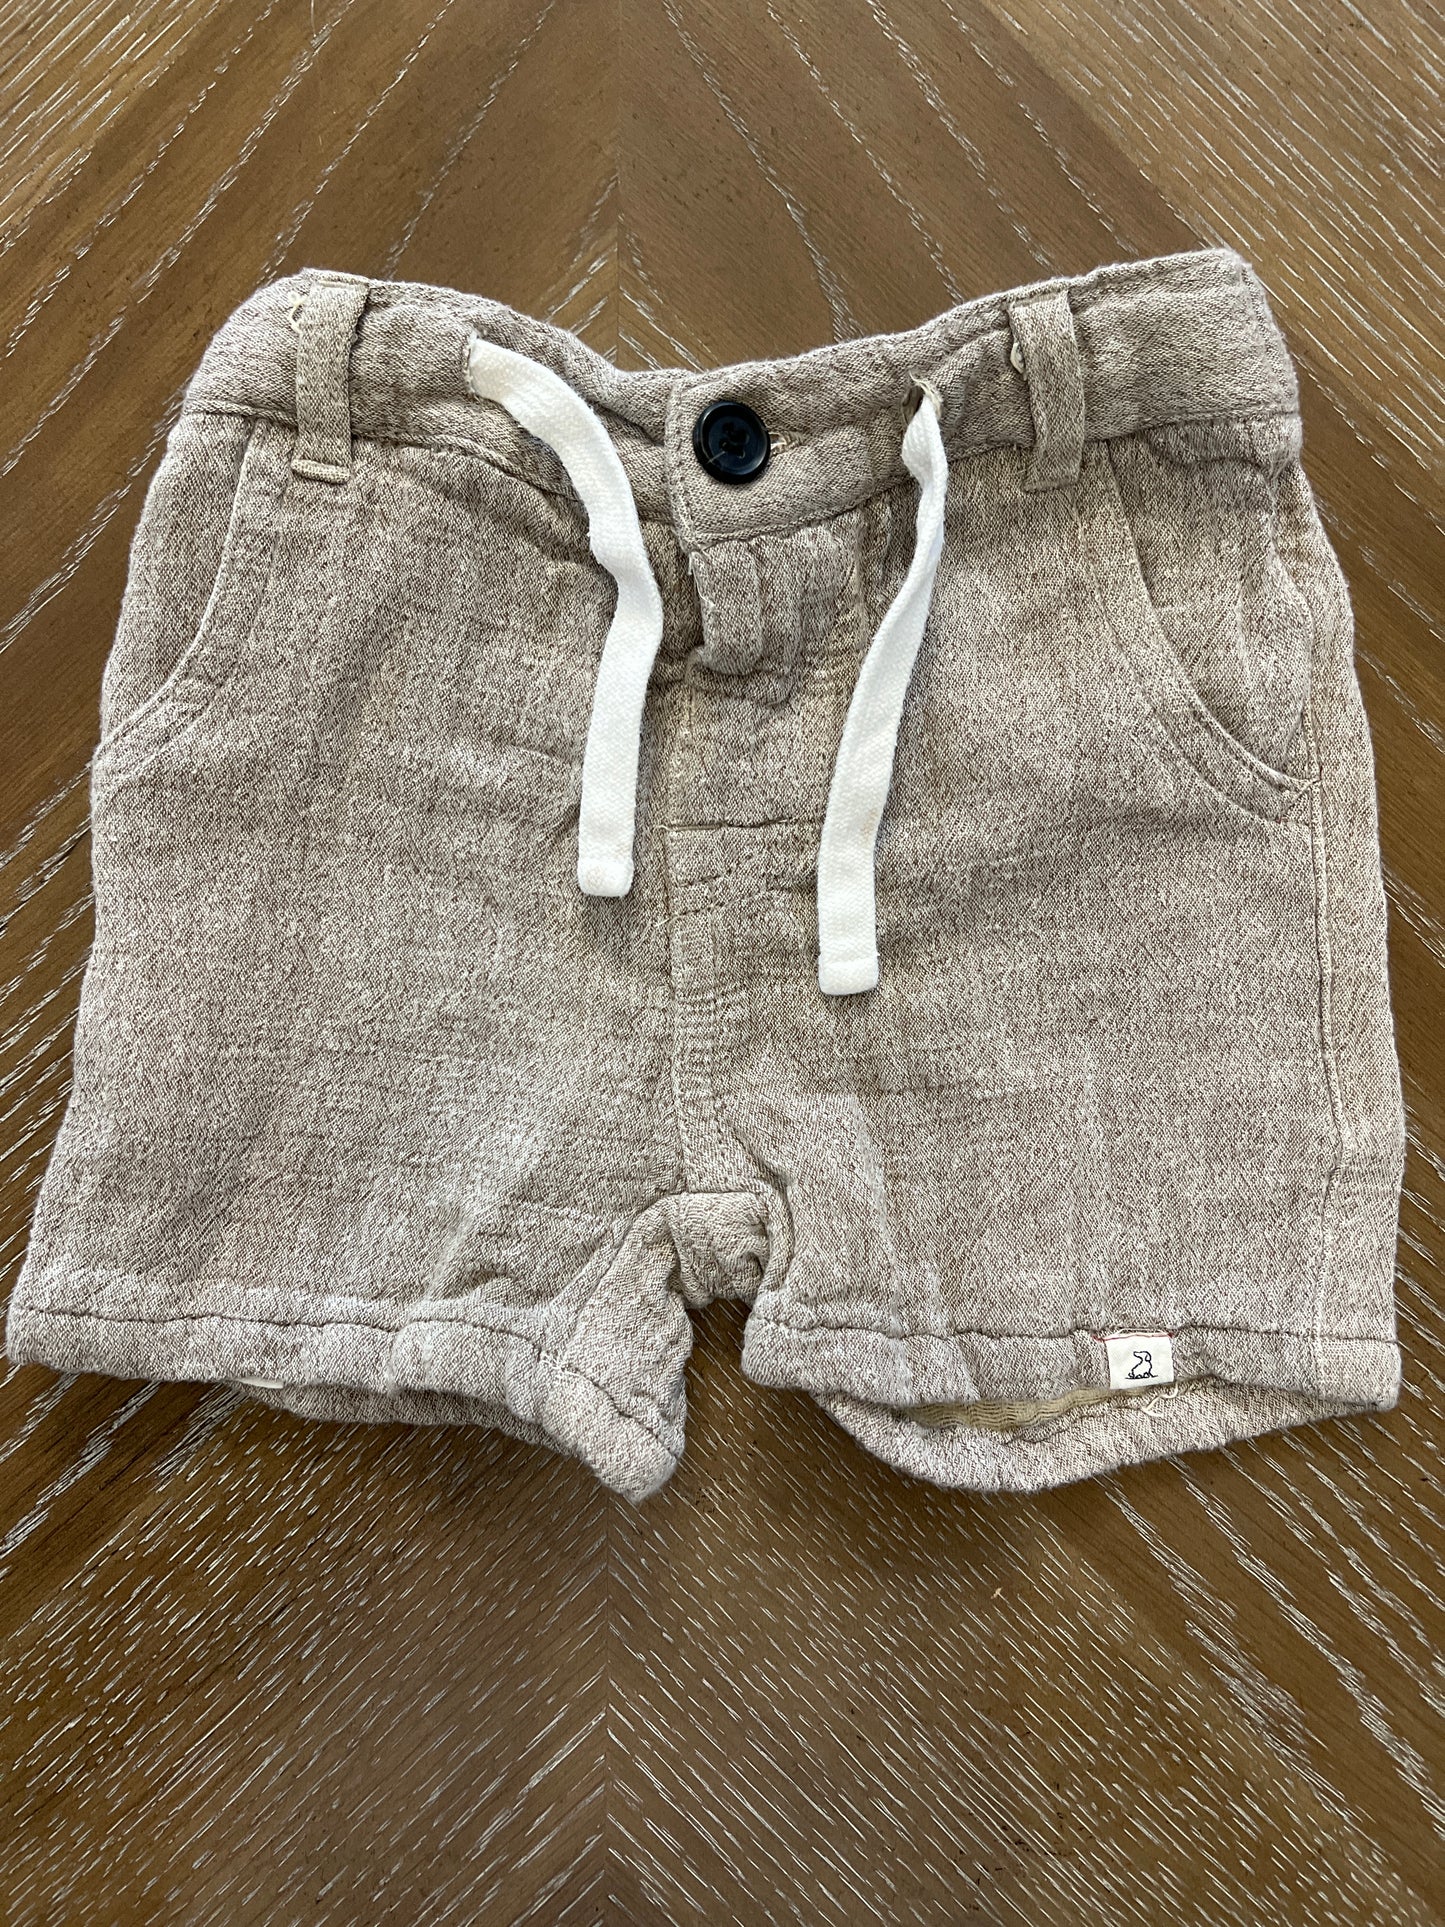 Me & Henry shorts 12-18 month adjustable drawstring and pockets